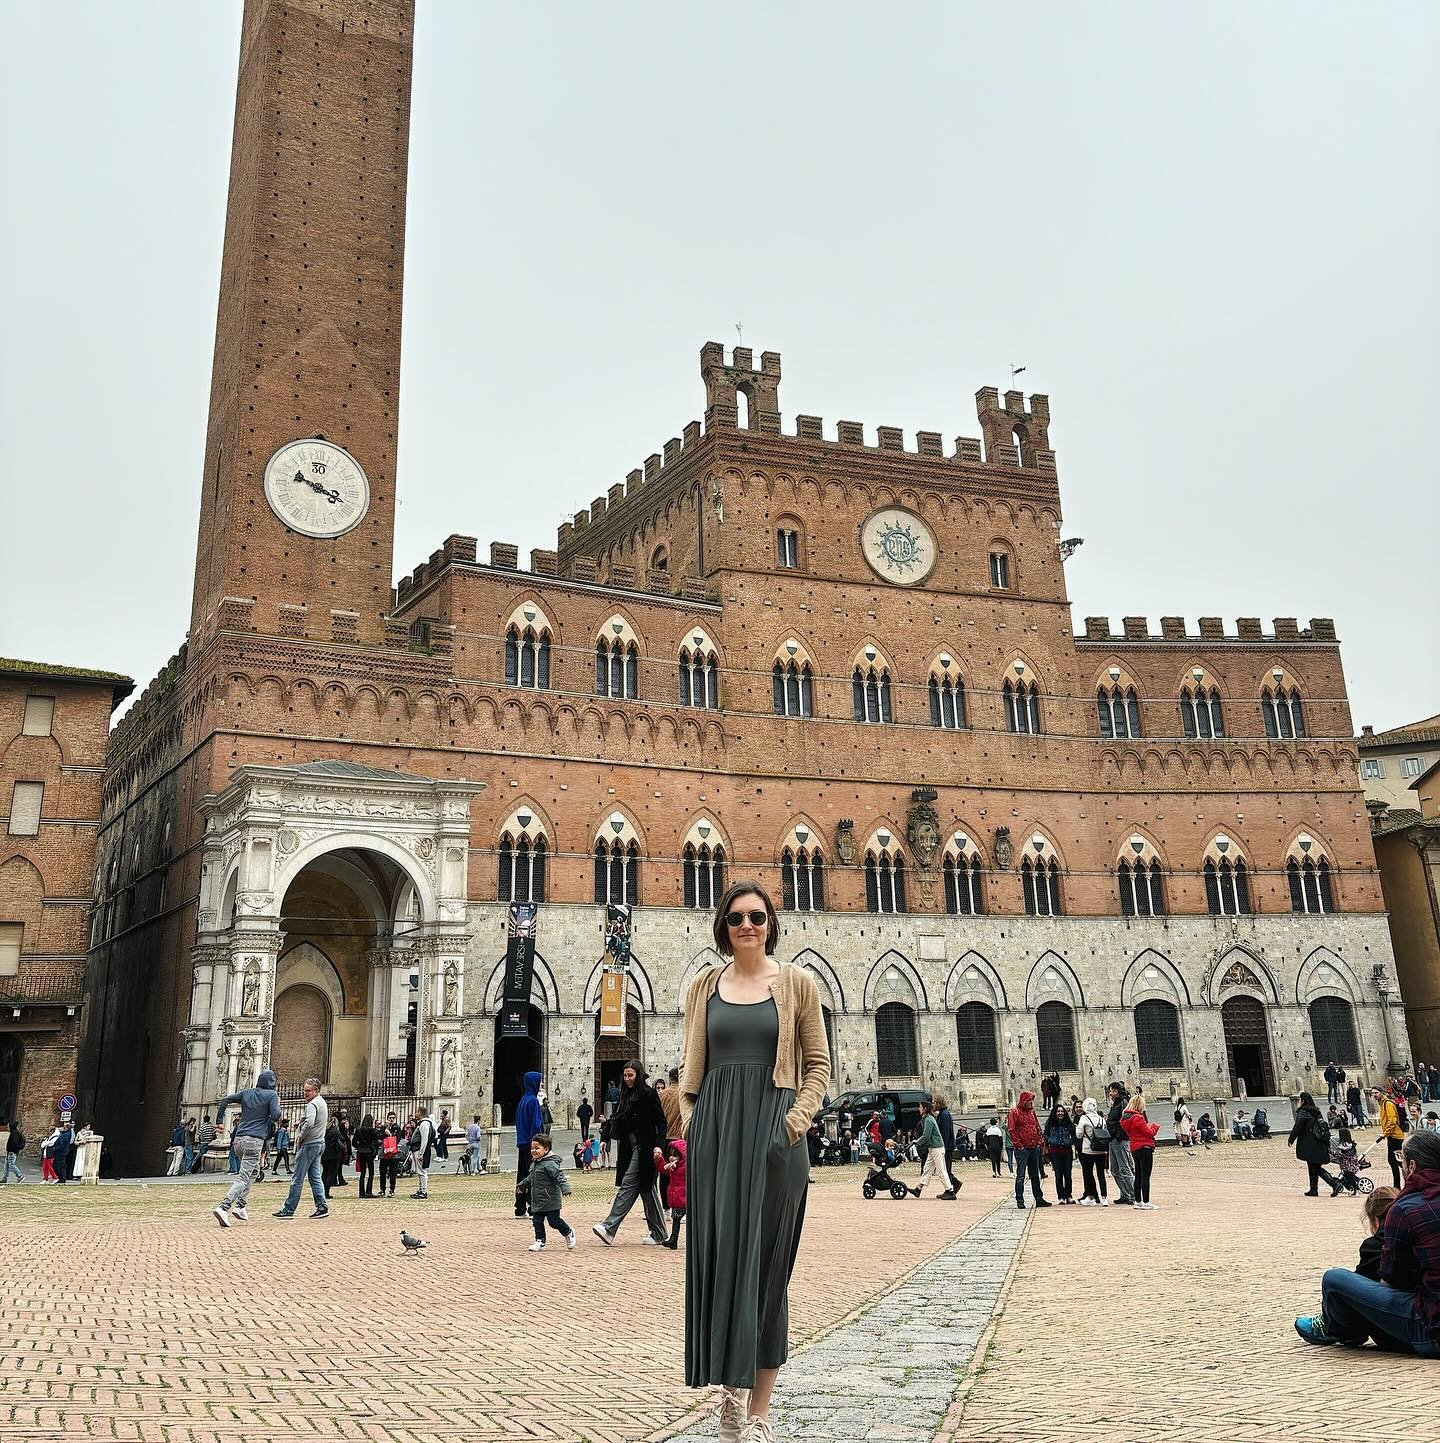 TOSCANA

Reunited with Siena / Cascate del Mulino / more gelato / our tuscan villa / pasta! / natural hot spring pools / countryside / quaint streets / Porto Santo Stefano 

A few things we learned on this portion of our trip:
1. they don&rsquo;t put